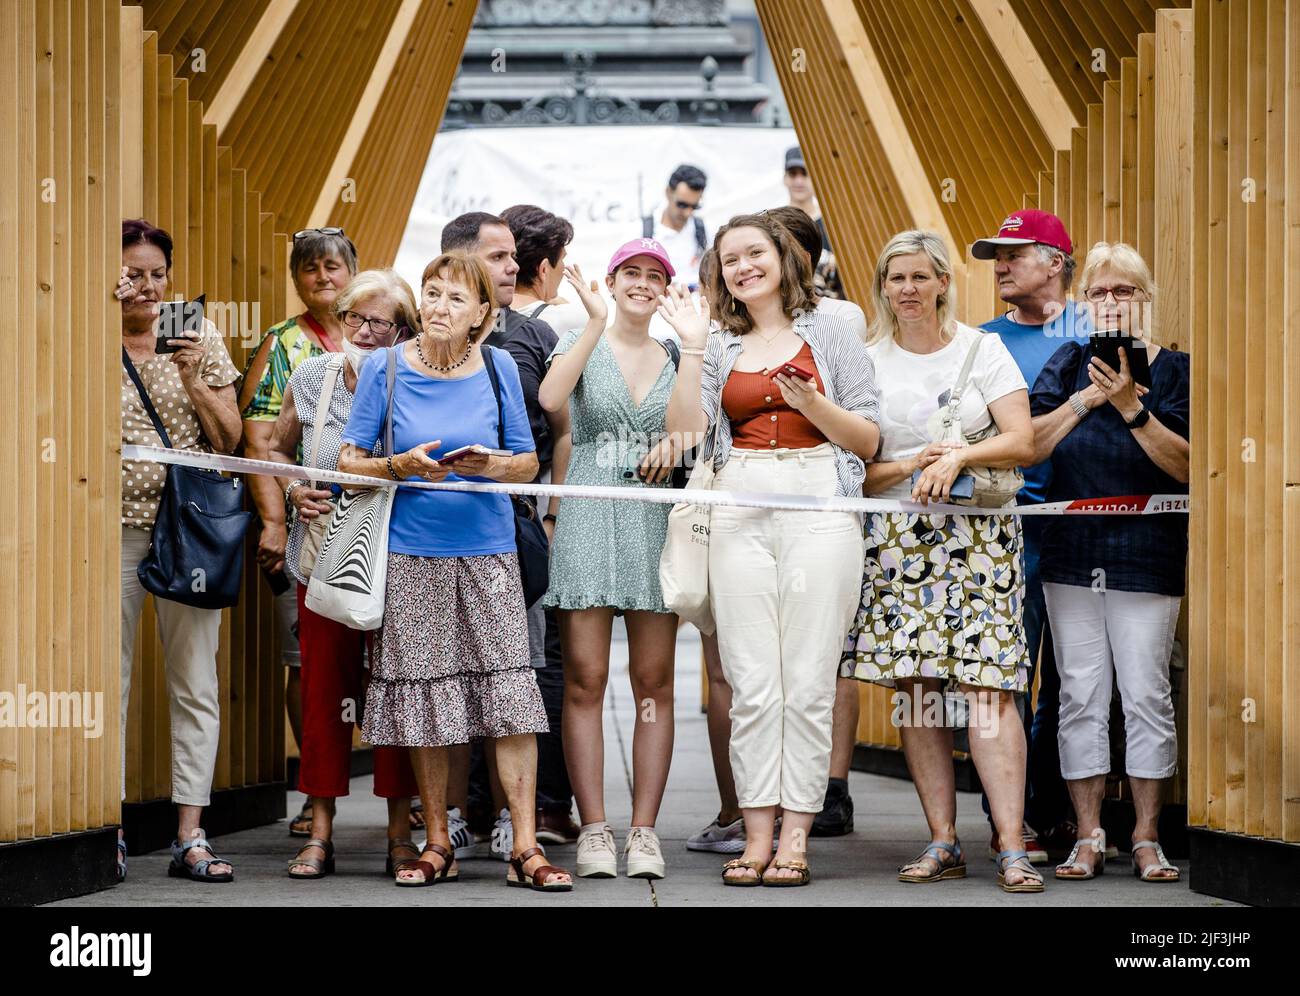 Austria, 29/06/2022, 2022-06-29 12:17:17 GRAZ - The public watches during the arrival of King Willem-Alexander and Queen Maxima at the city hall. In Graz, the royal couple concludes the three-day state visit to Austria. ANP SEM VAN DER WAL netherlands out - belgium out Stock Photo